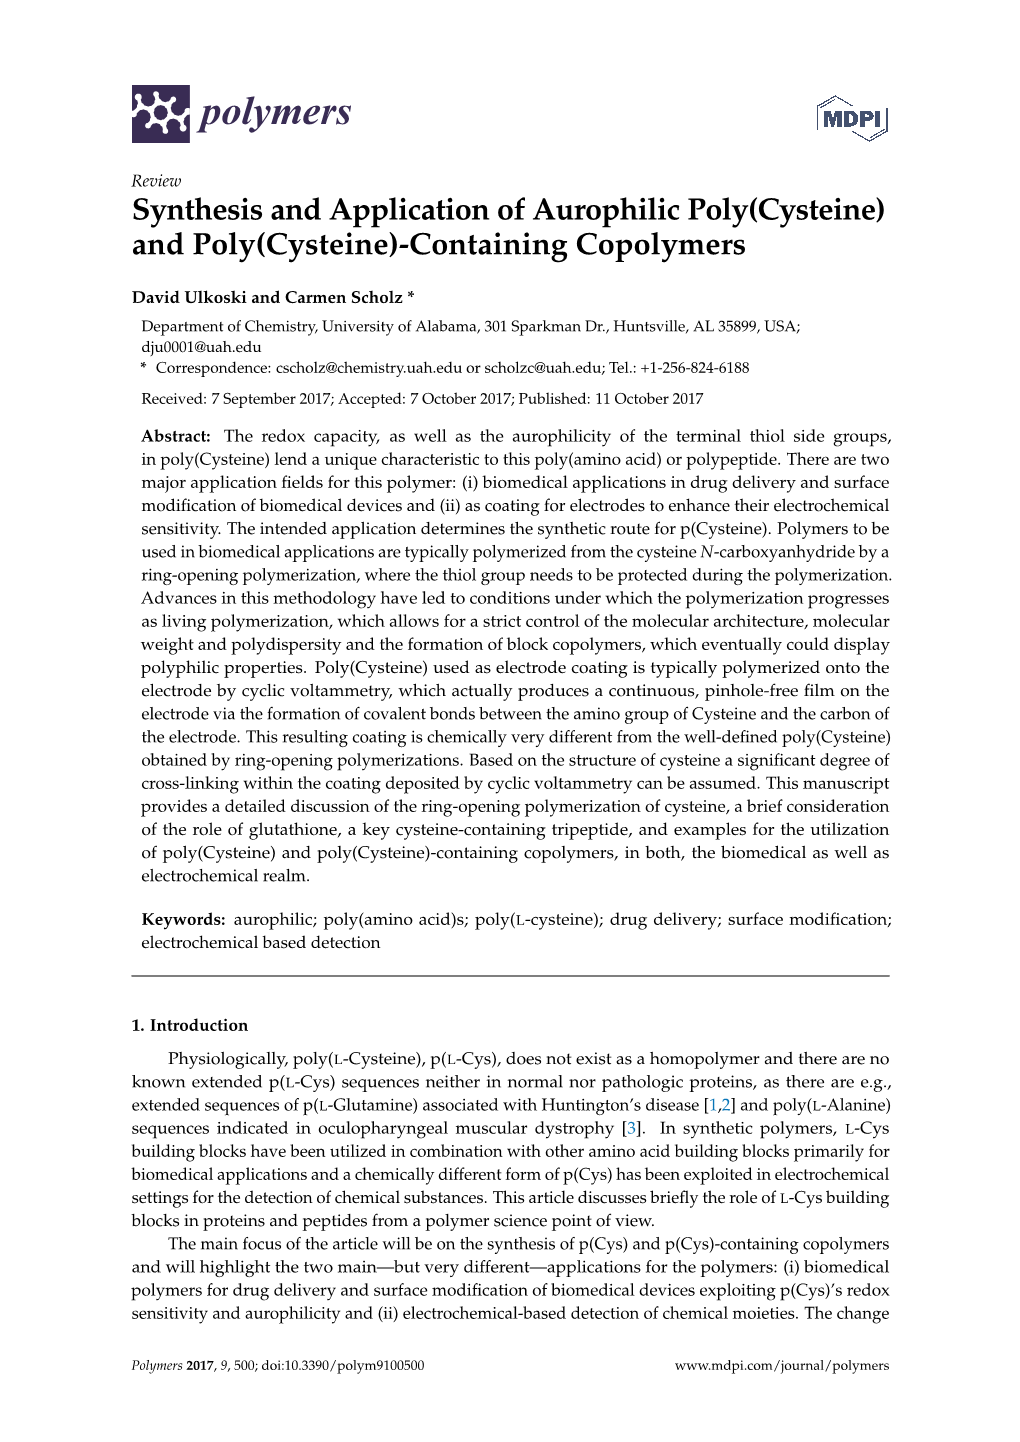 Synthesis and Application of Aurophilic Poly(Cysteine) and Poly(Cysteine)-Containing Copolymers